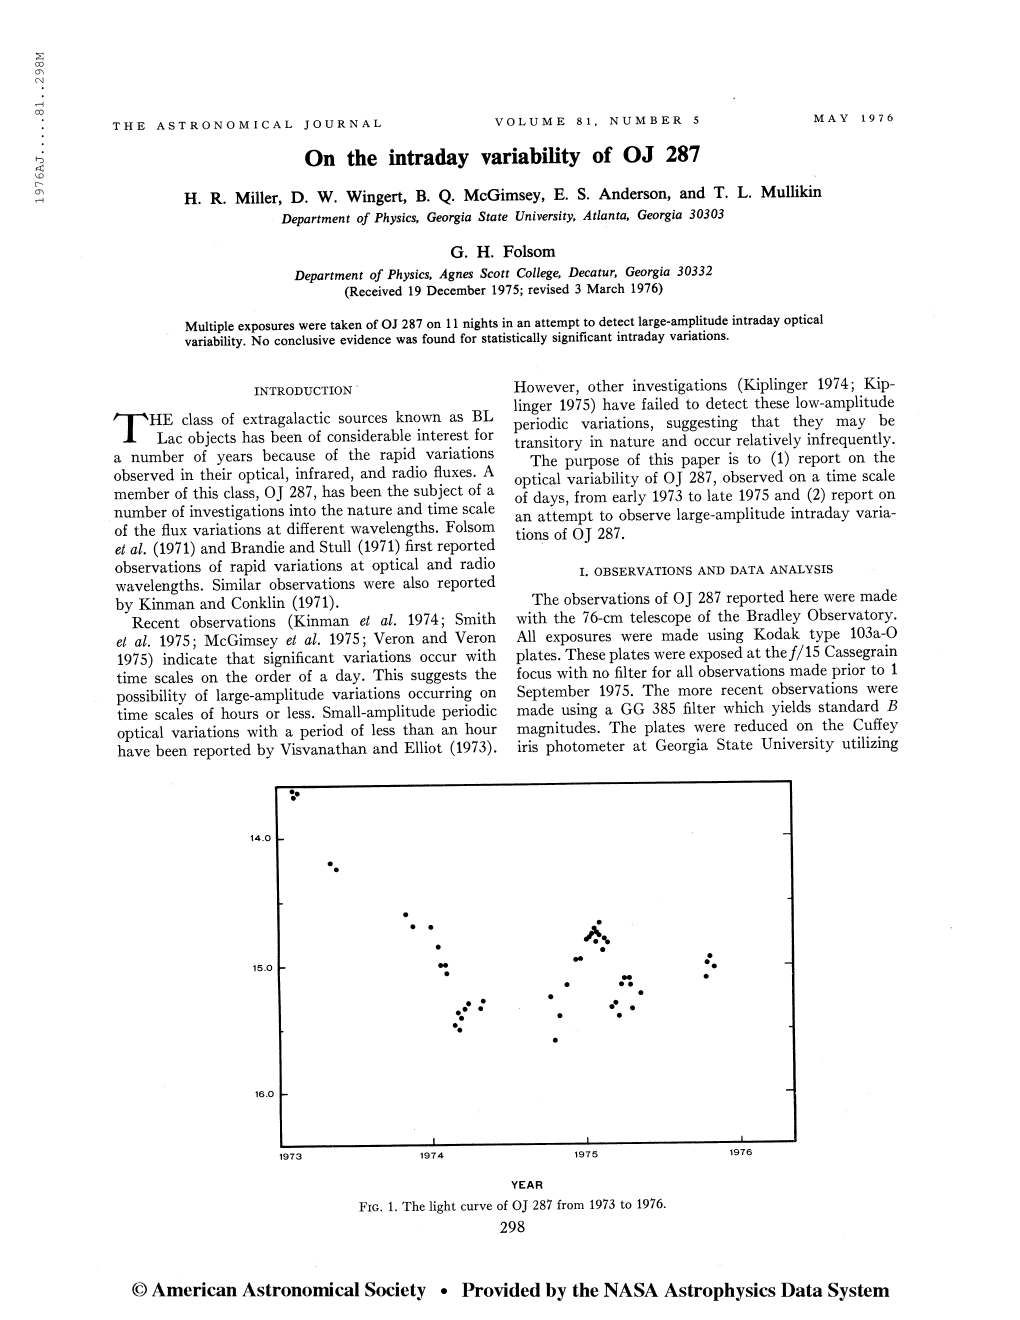 1976AJ 81. . 2 98M the ASTRONOMICAL JOURNAL VOLUME 81, NUMBER 5 MAY 1976 on the Intraday Variability of OJ 287 H. R. Miller, D